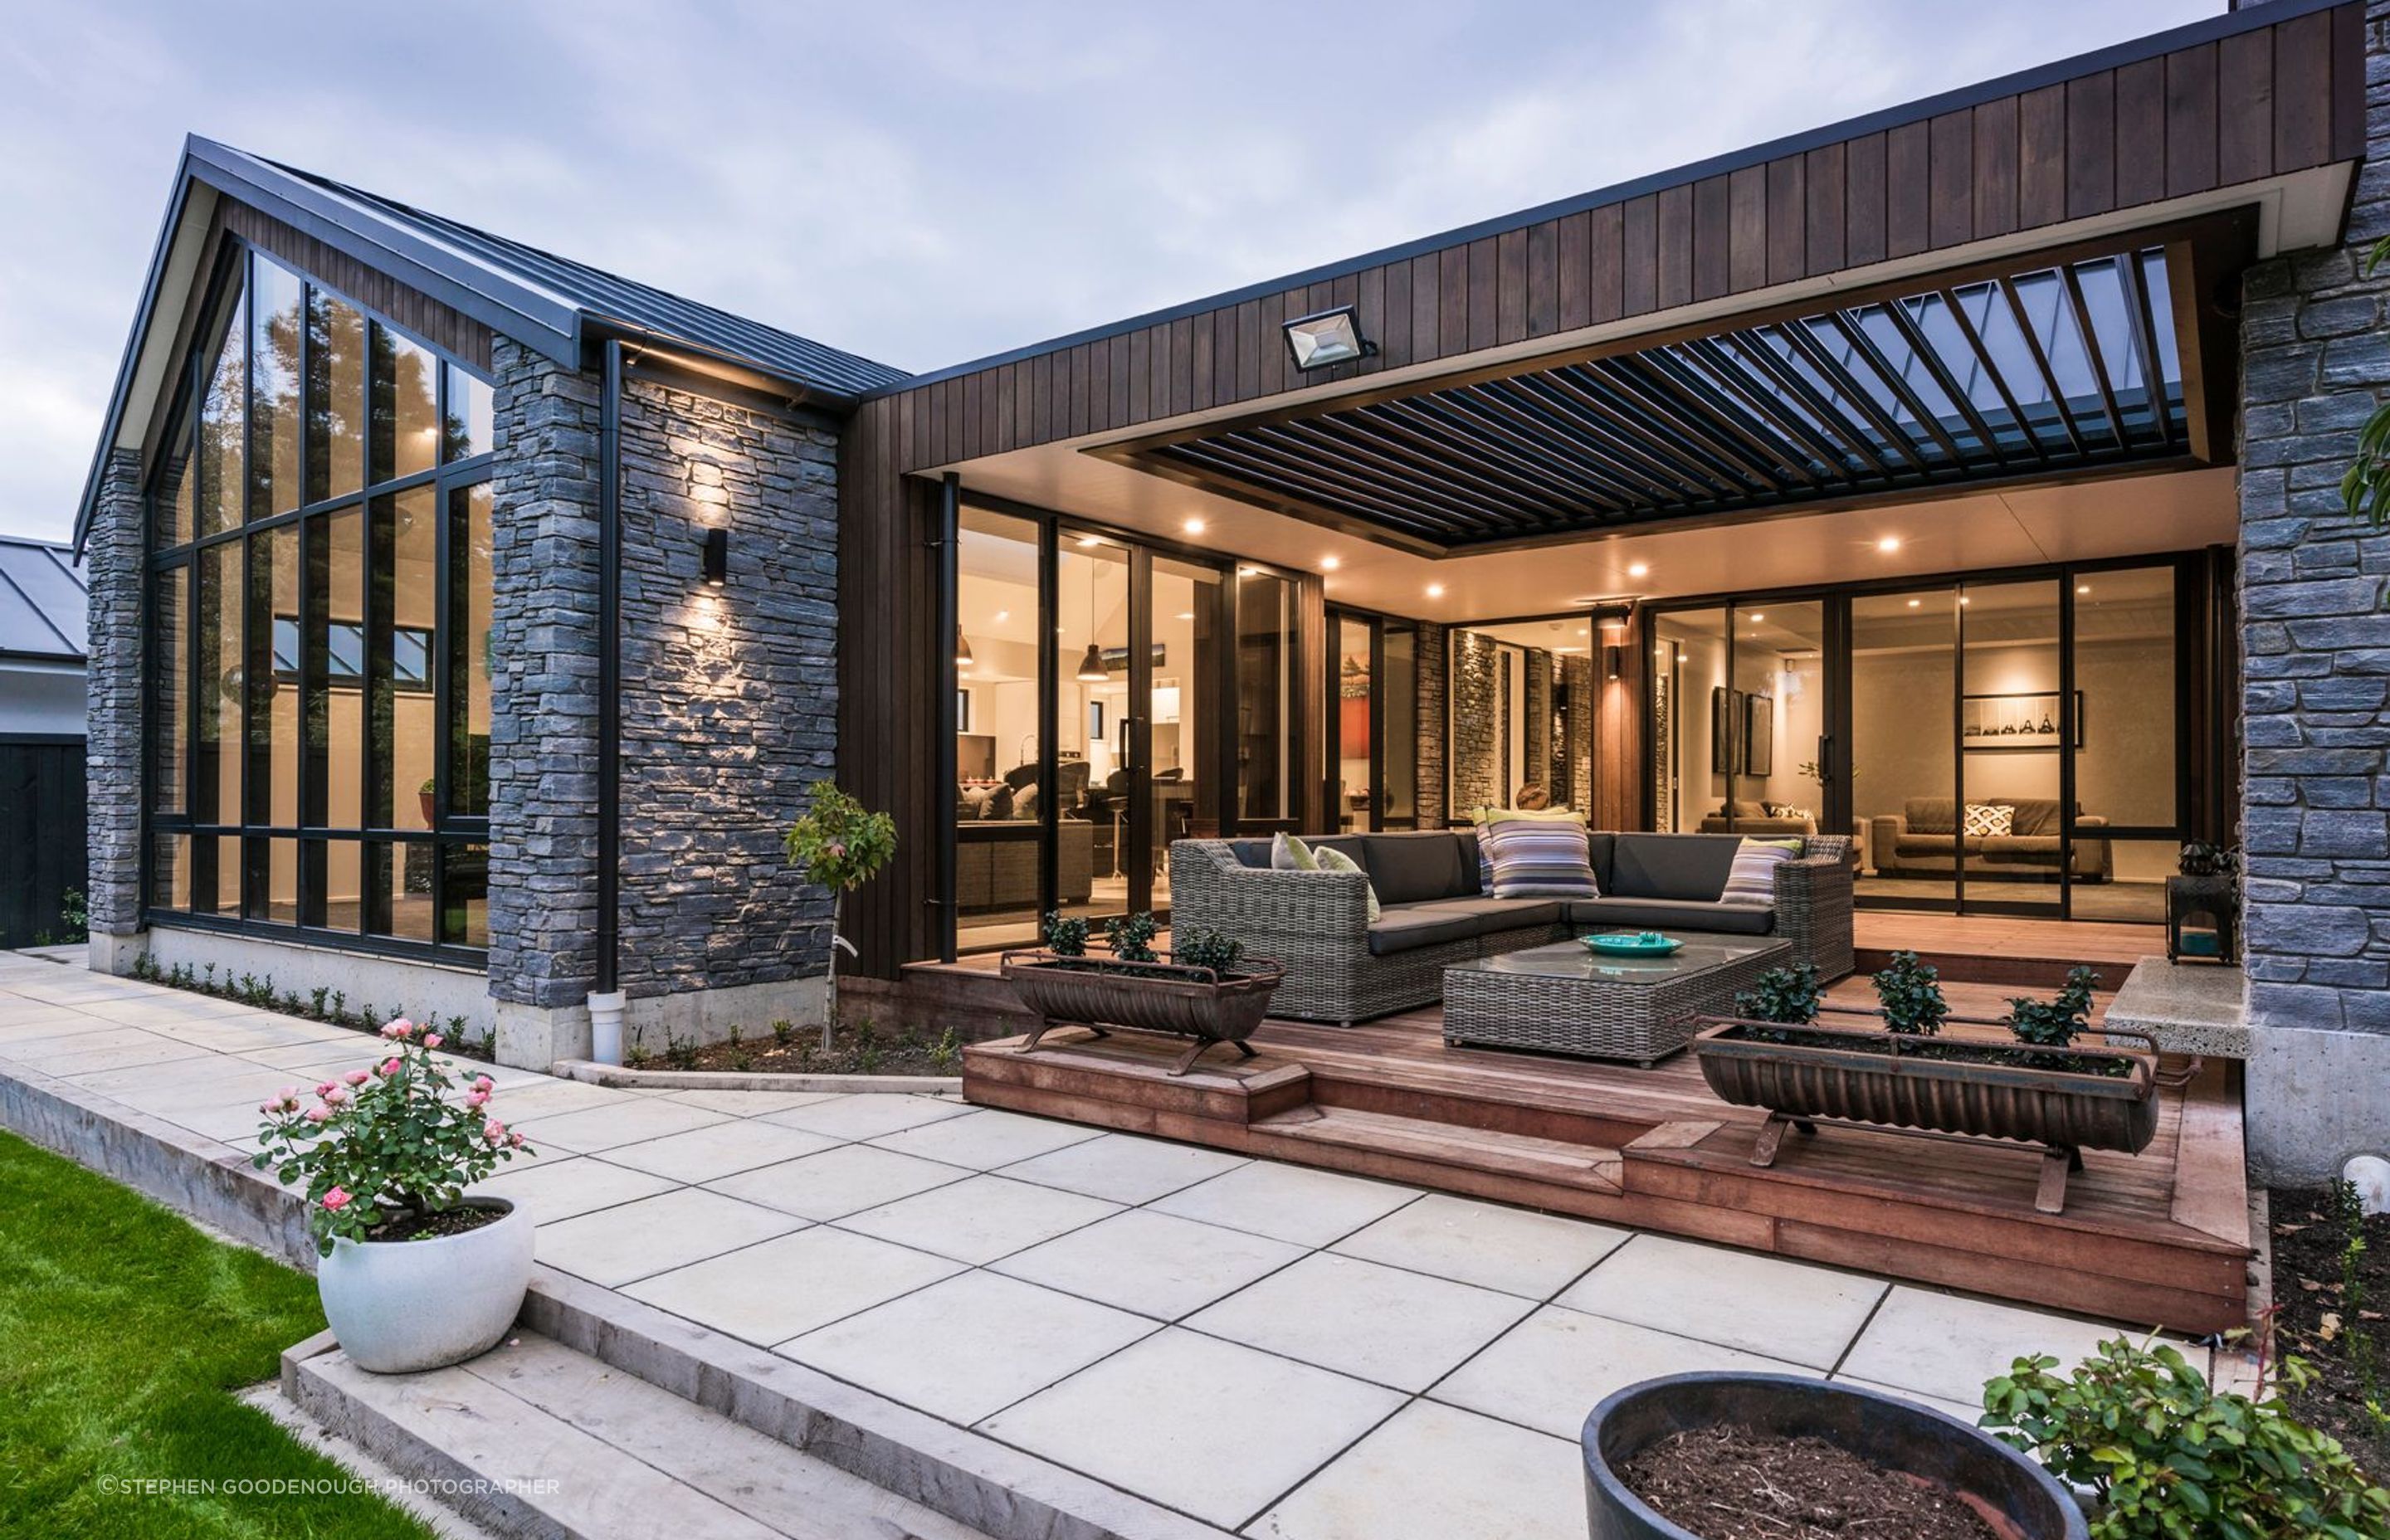 The electric louvred outdoor living area features  a stone fireplace and directly enjoys the view of the stream.